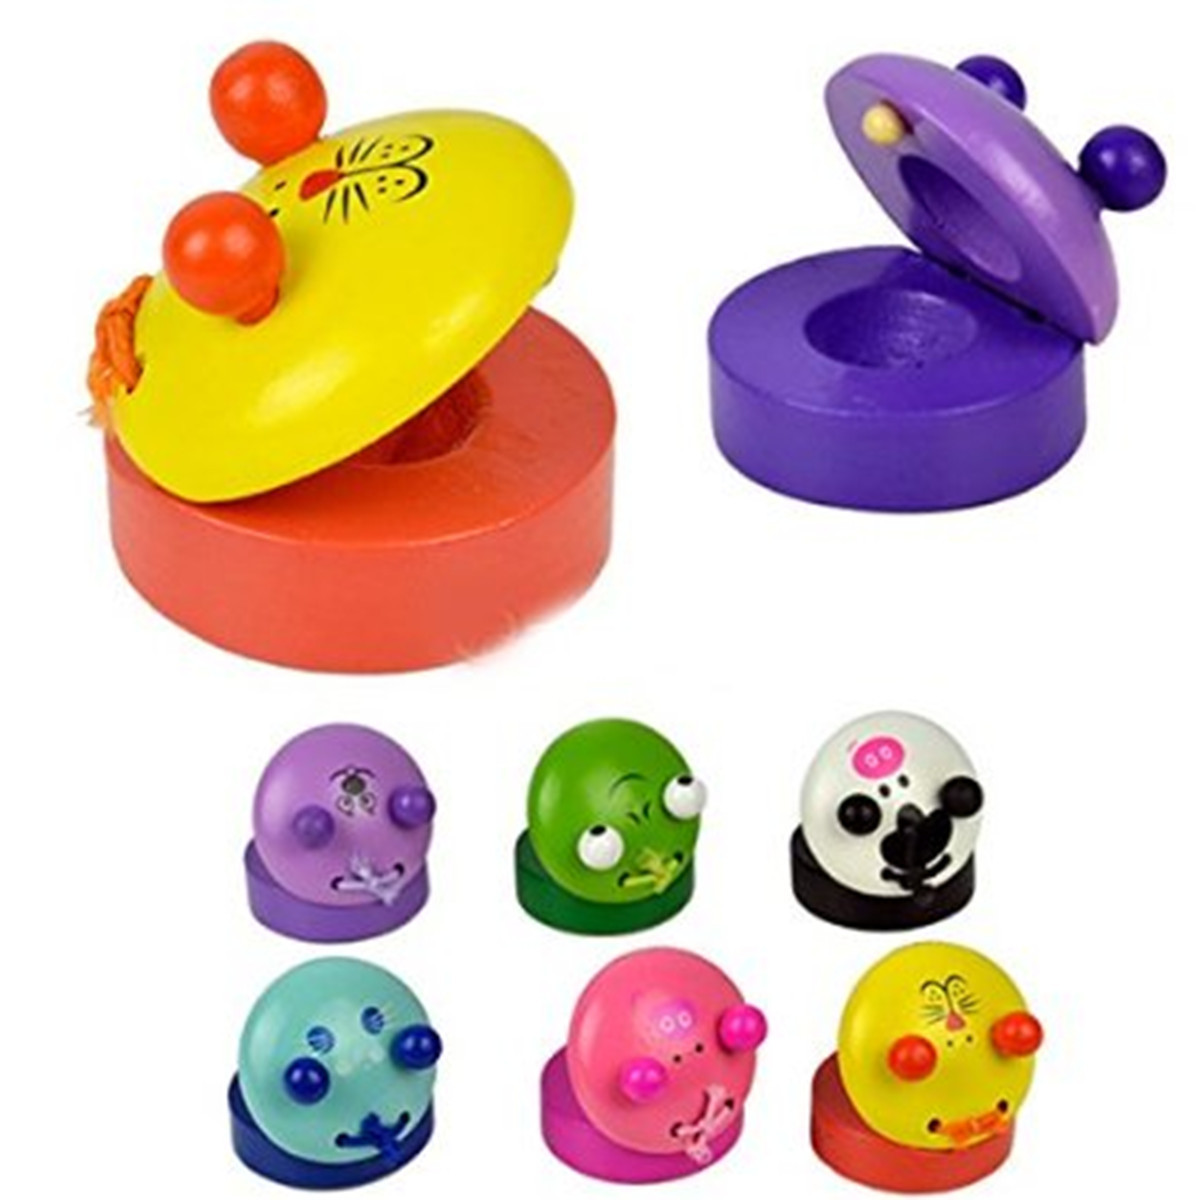 Orff Musical Instruments Wood Cartoon Castanet Educational Toy for Kids Toddlers - Photo: 10